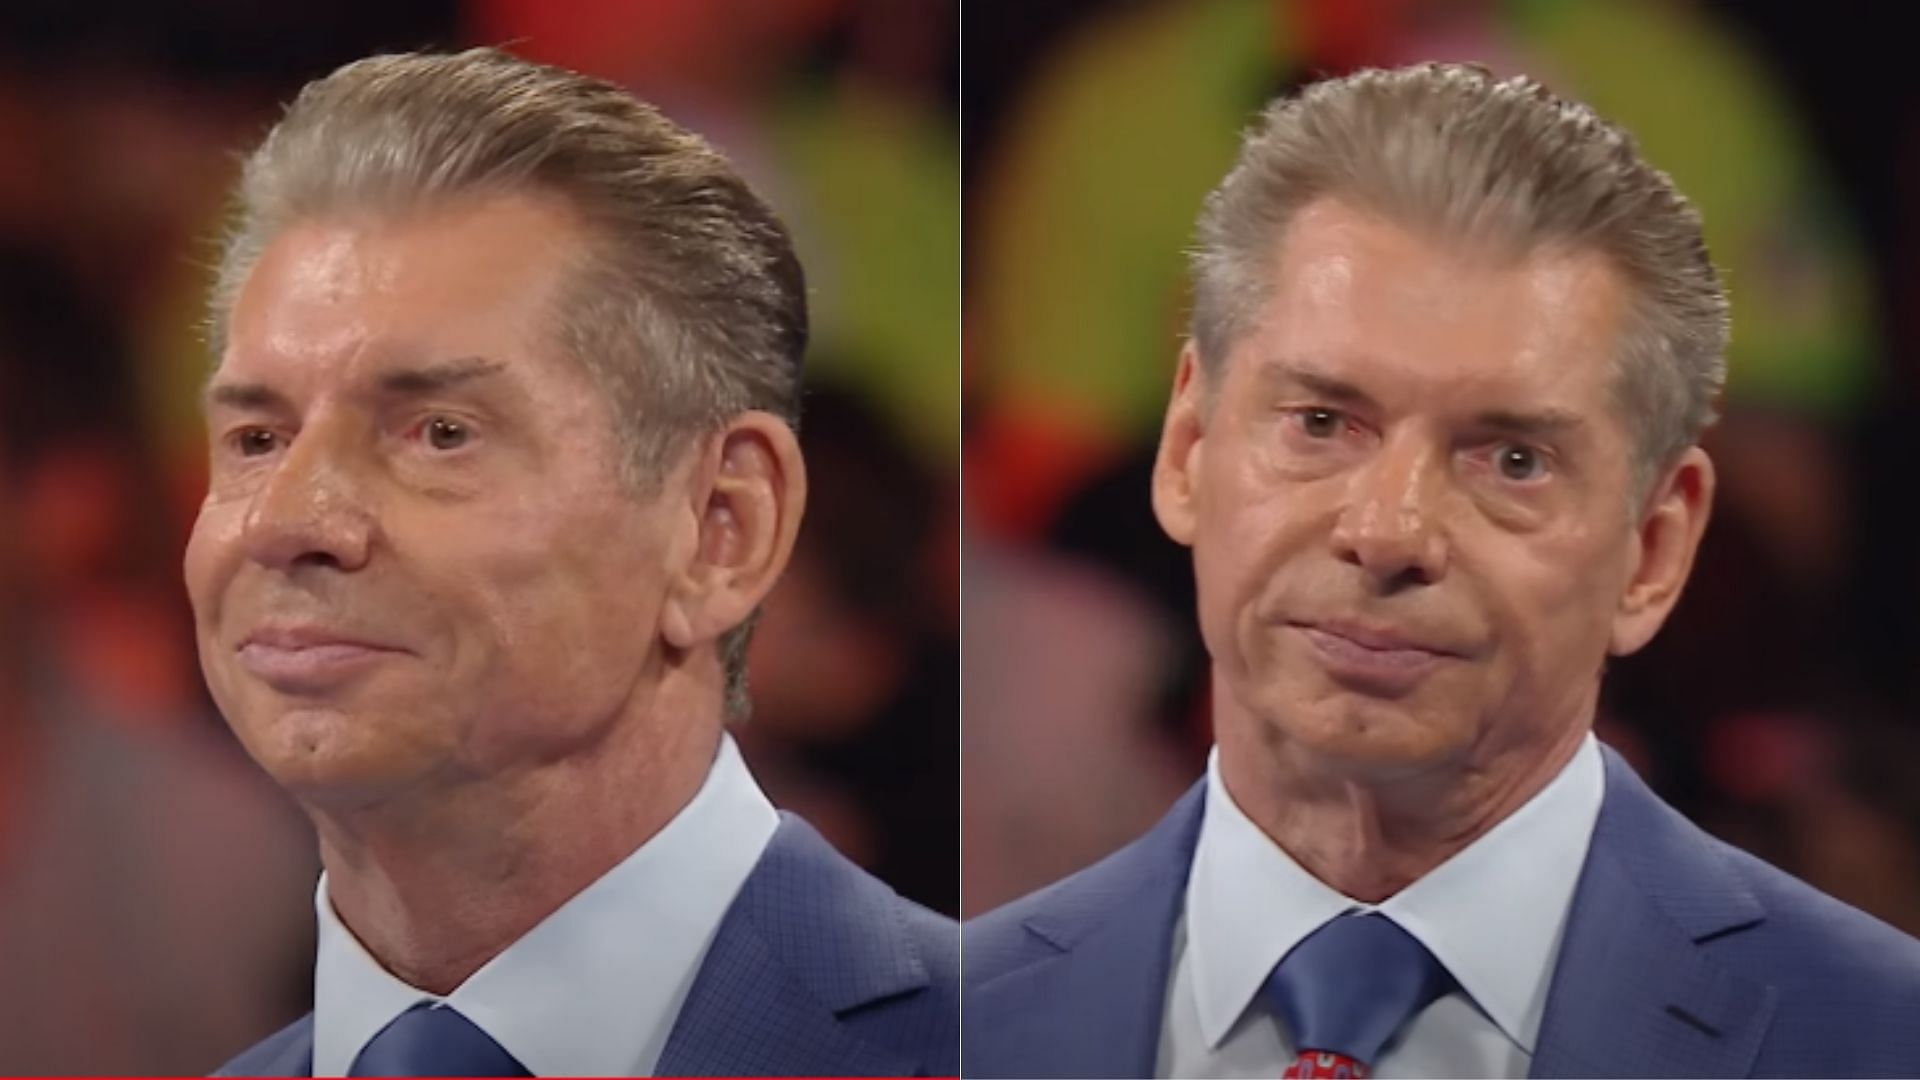 Vince Russo wrote television for Vince McMahon